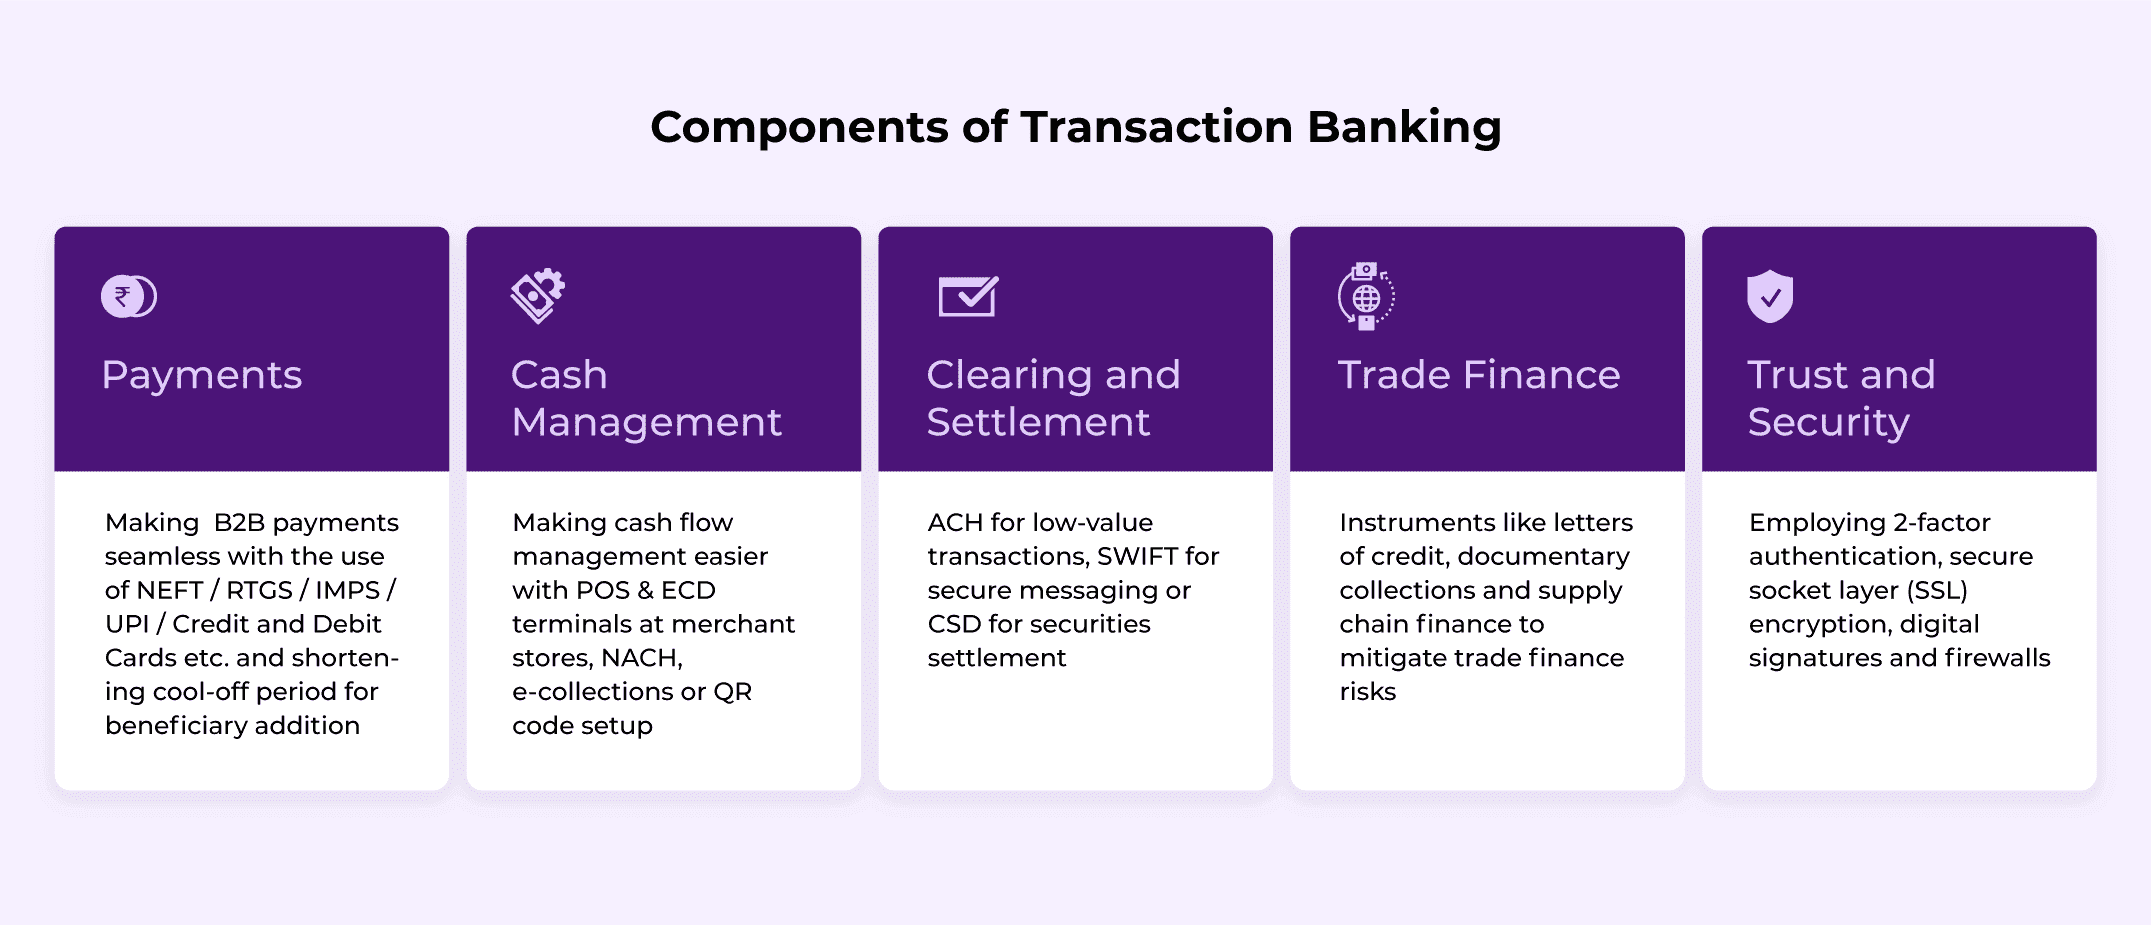 Components of Transaction Banking